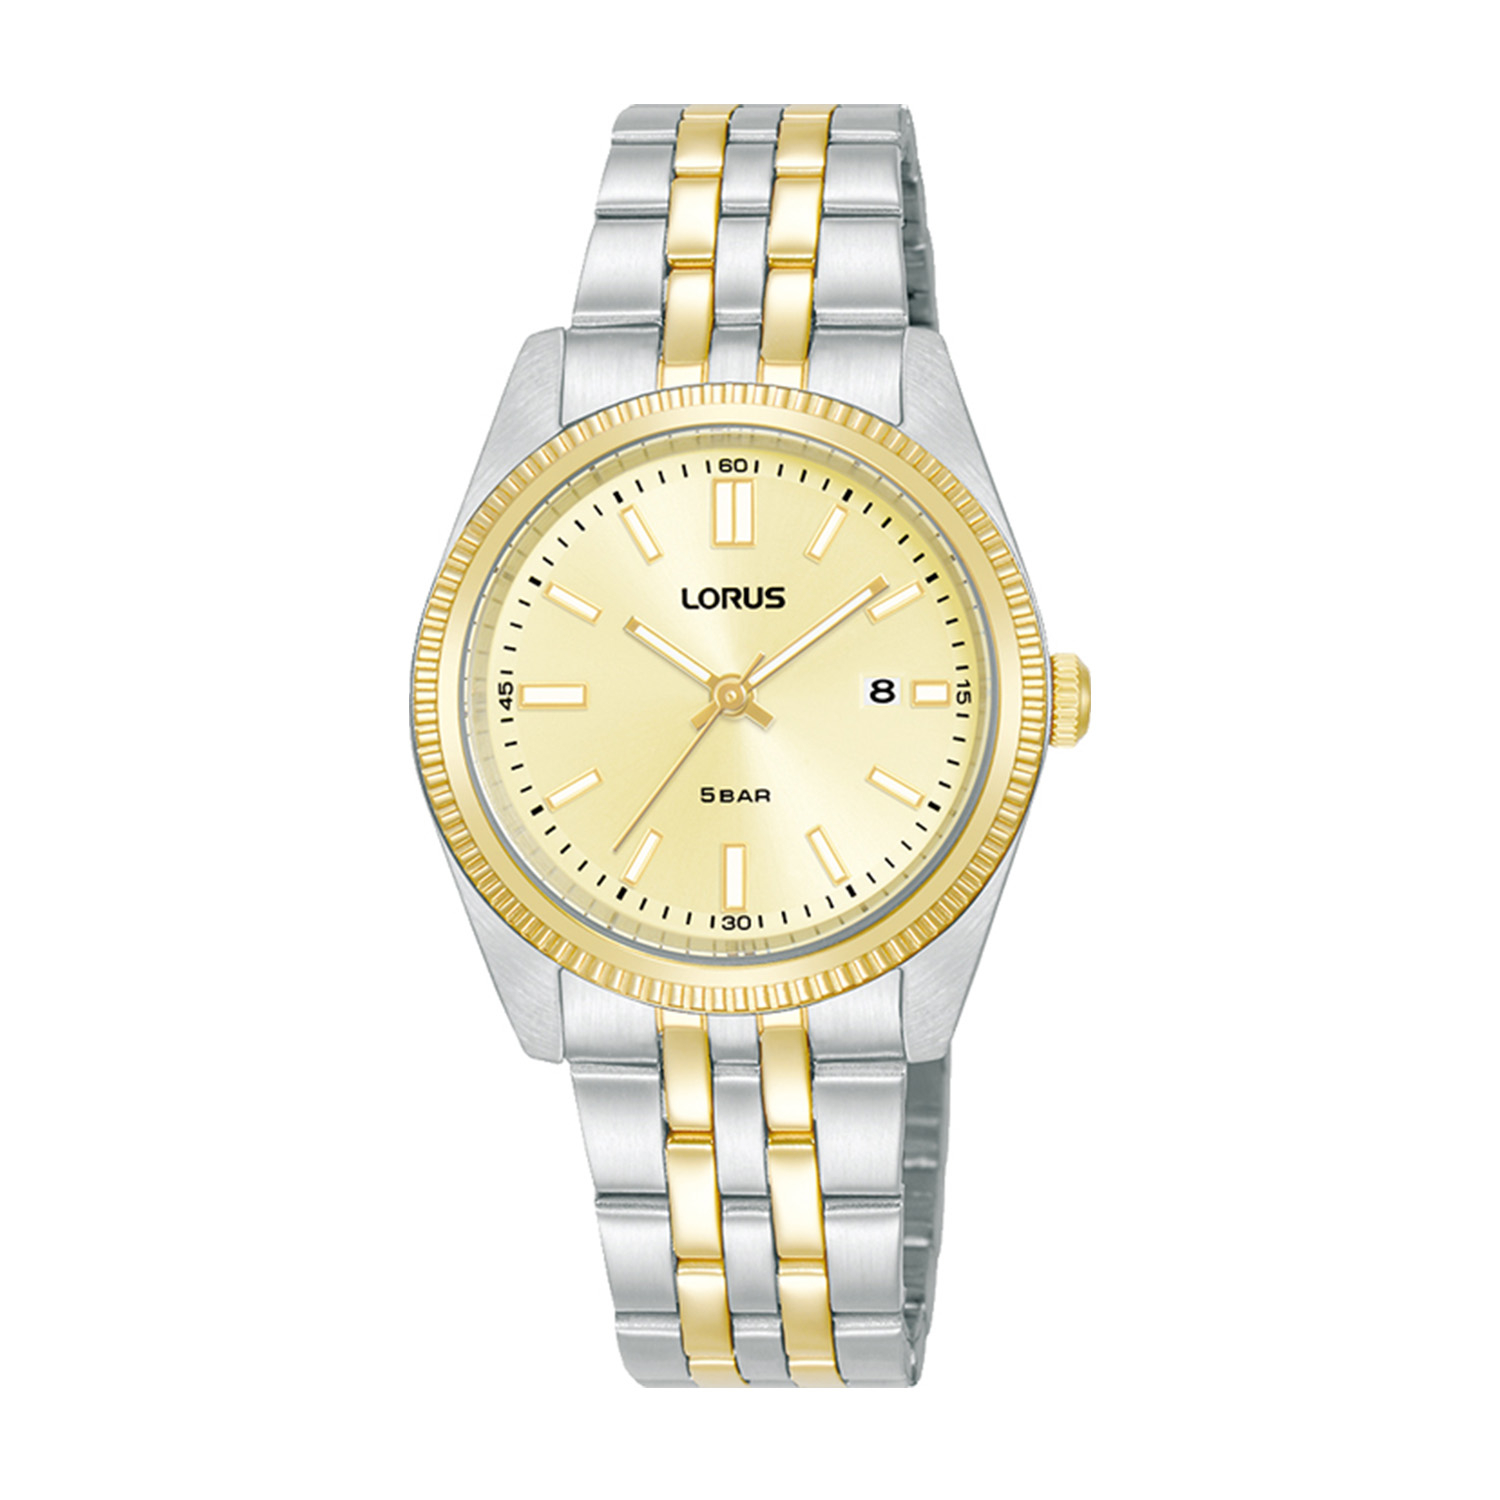 Womens watch LORUS made of two-tone stainless steel with gold dial and bracelet.